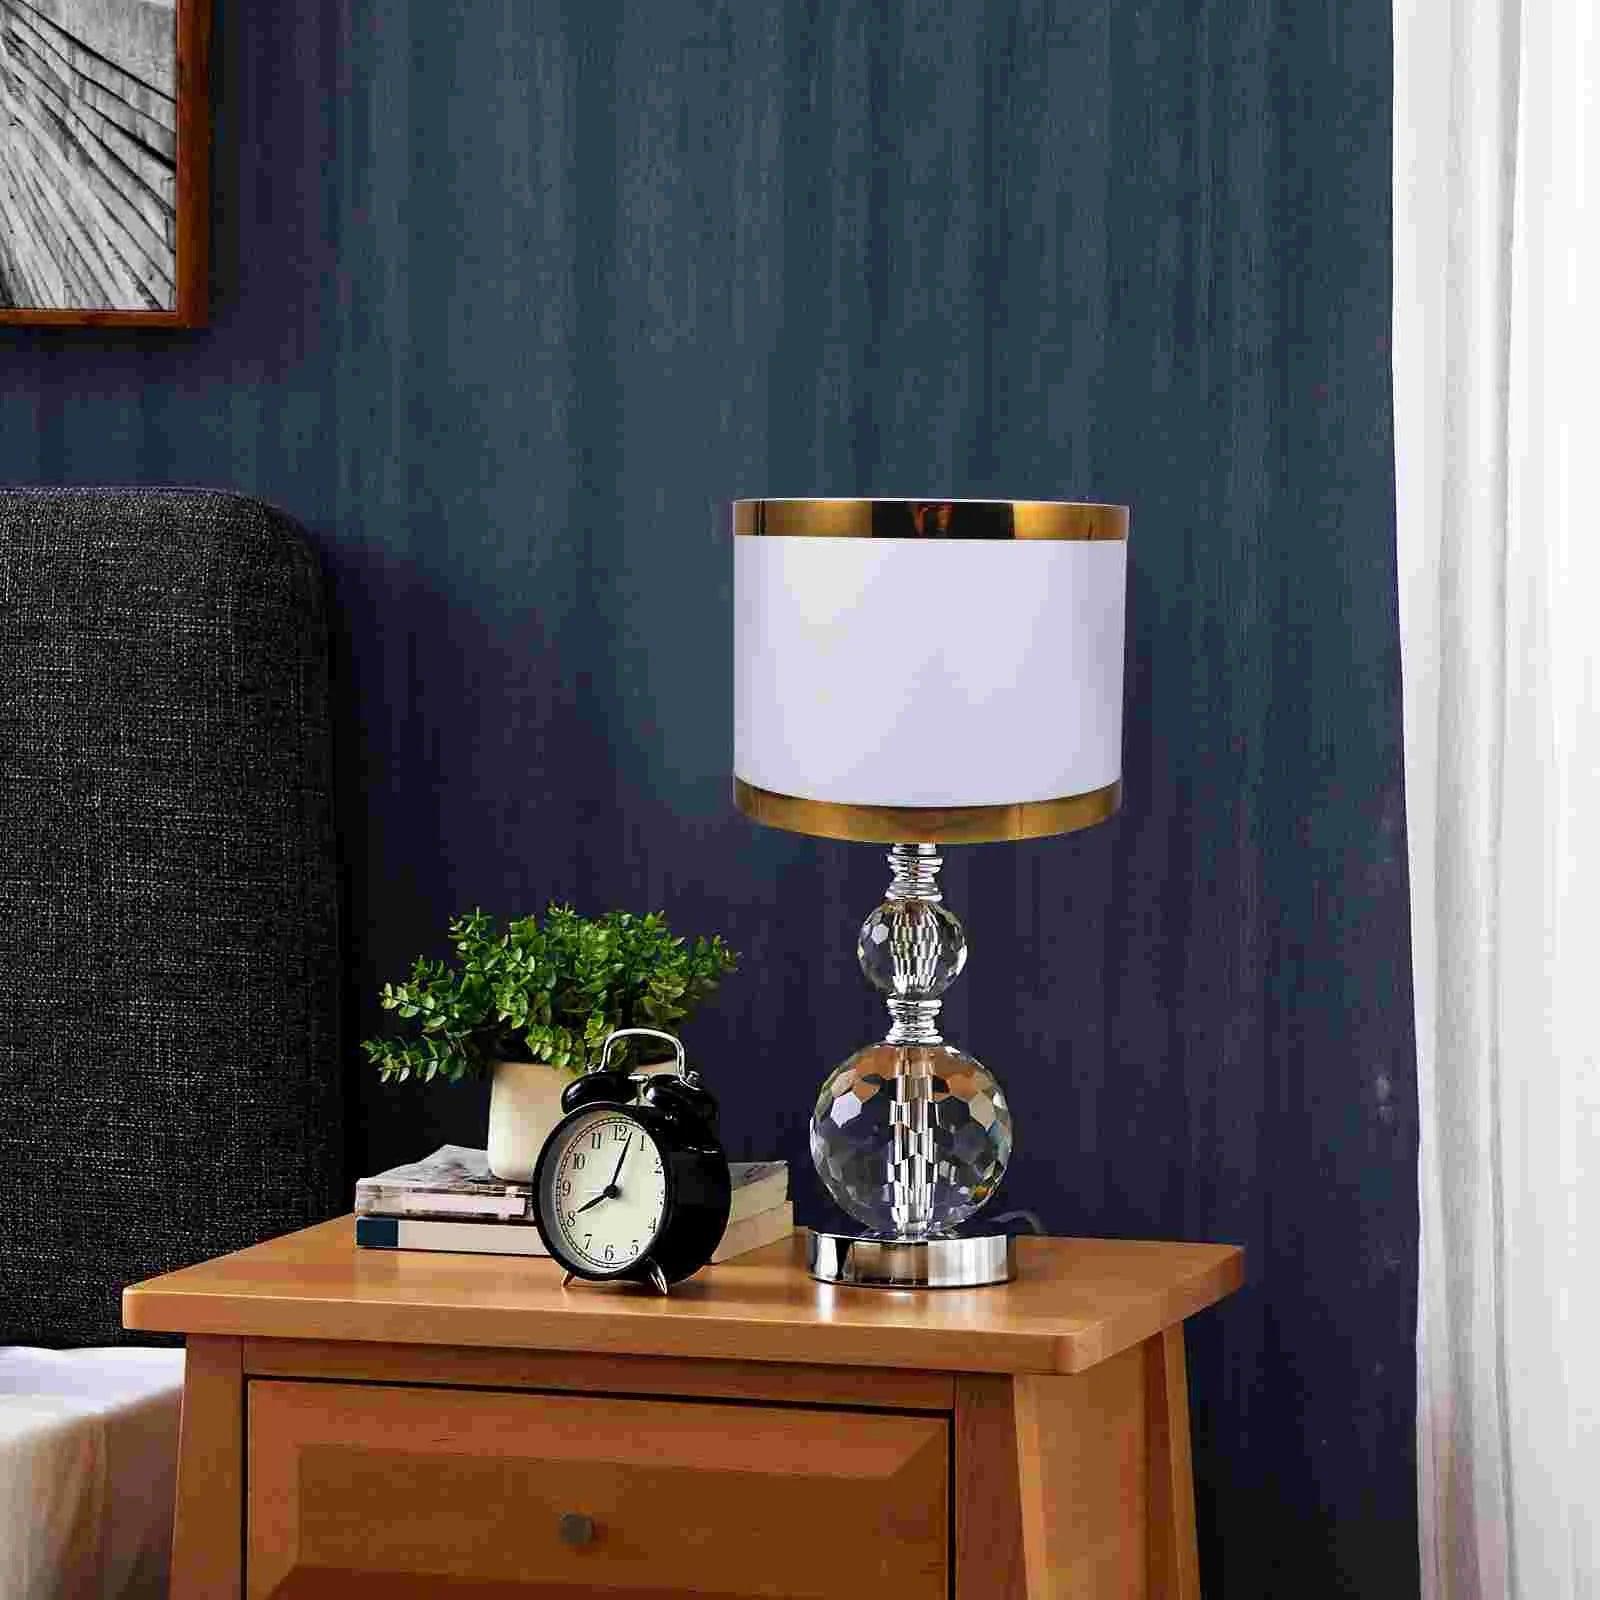 Replacement Lampshade Shade <img src="https://ae03.alicdn.com/kf/S3df2e0dcf885421ca57abb9d1bc5fd24d.jpg" slate-data-type="image"> - Specialty Shades